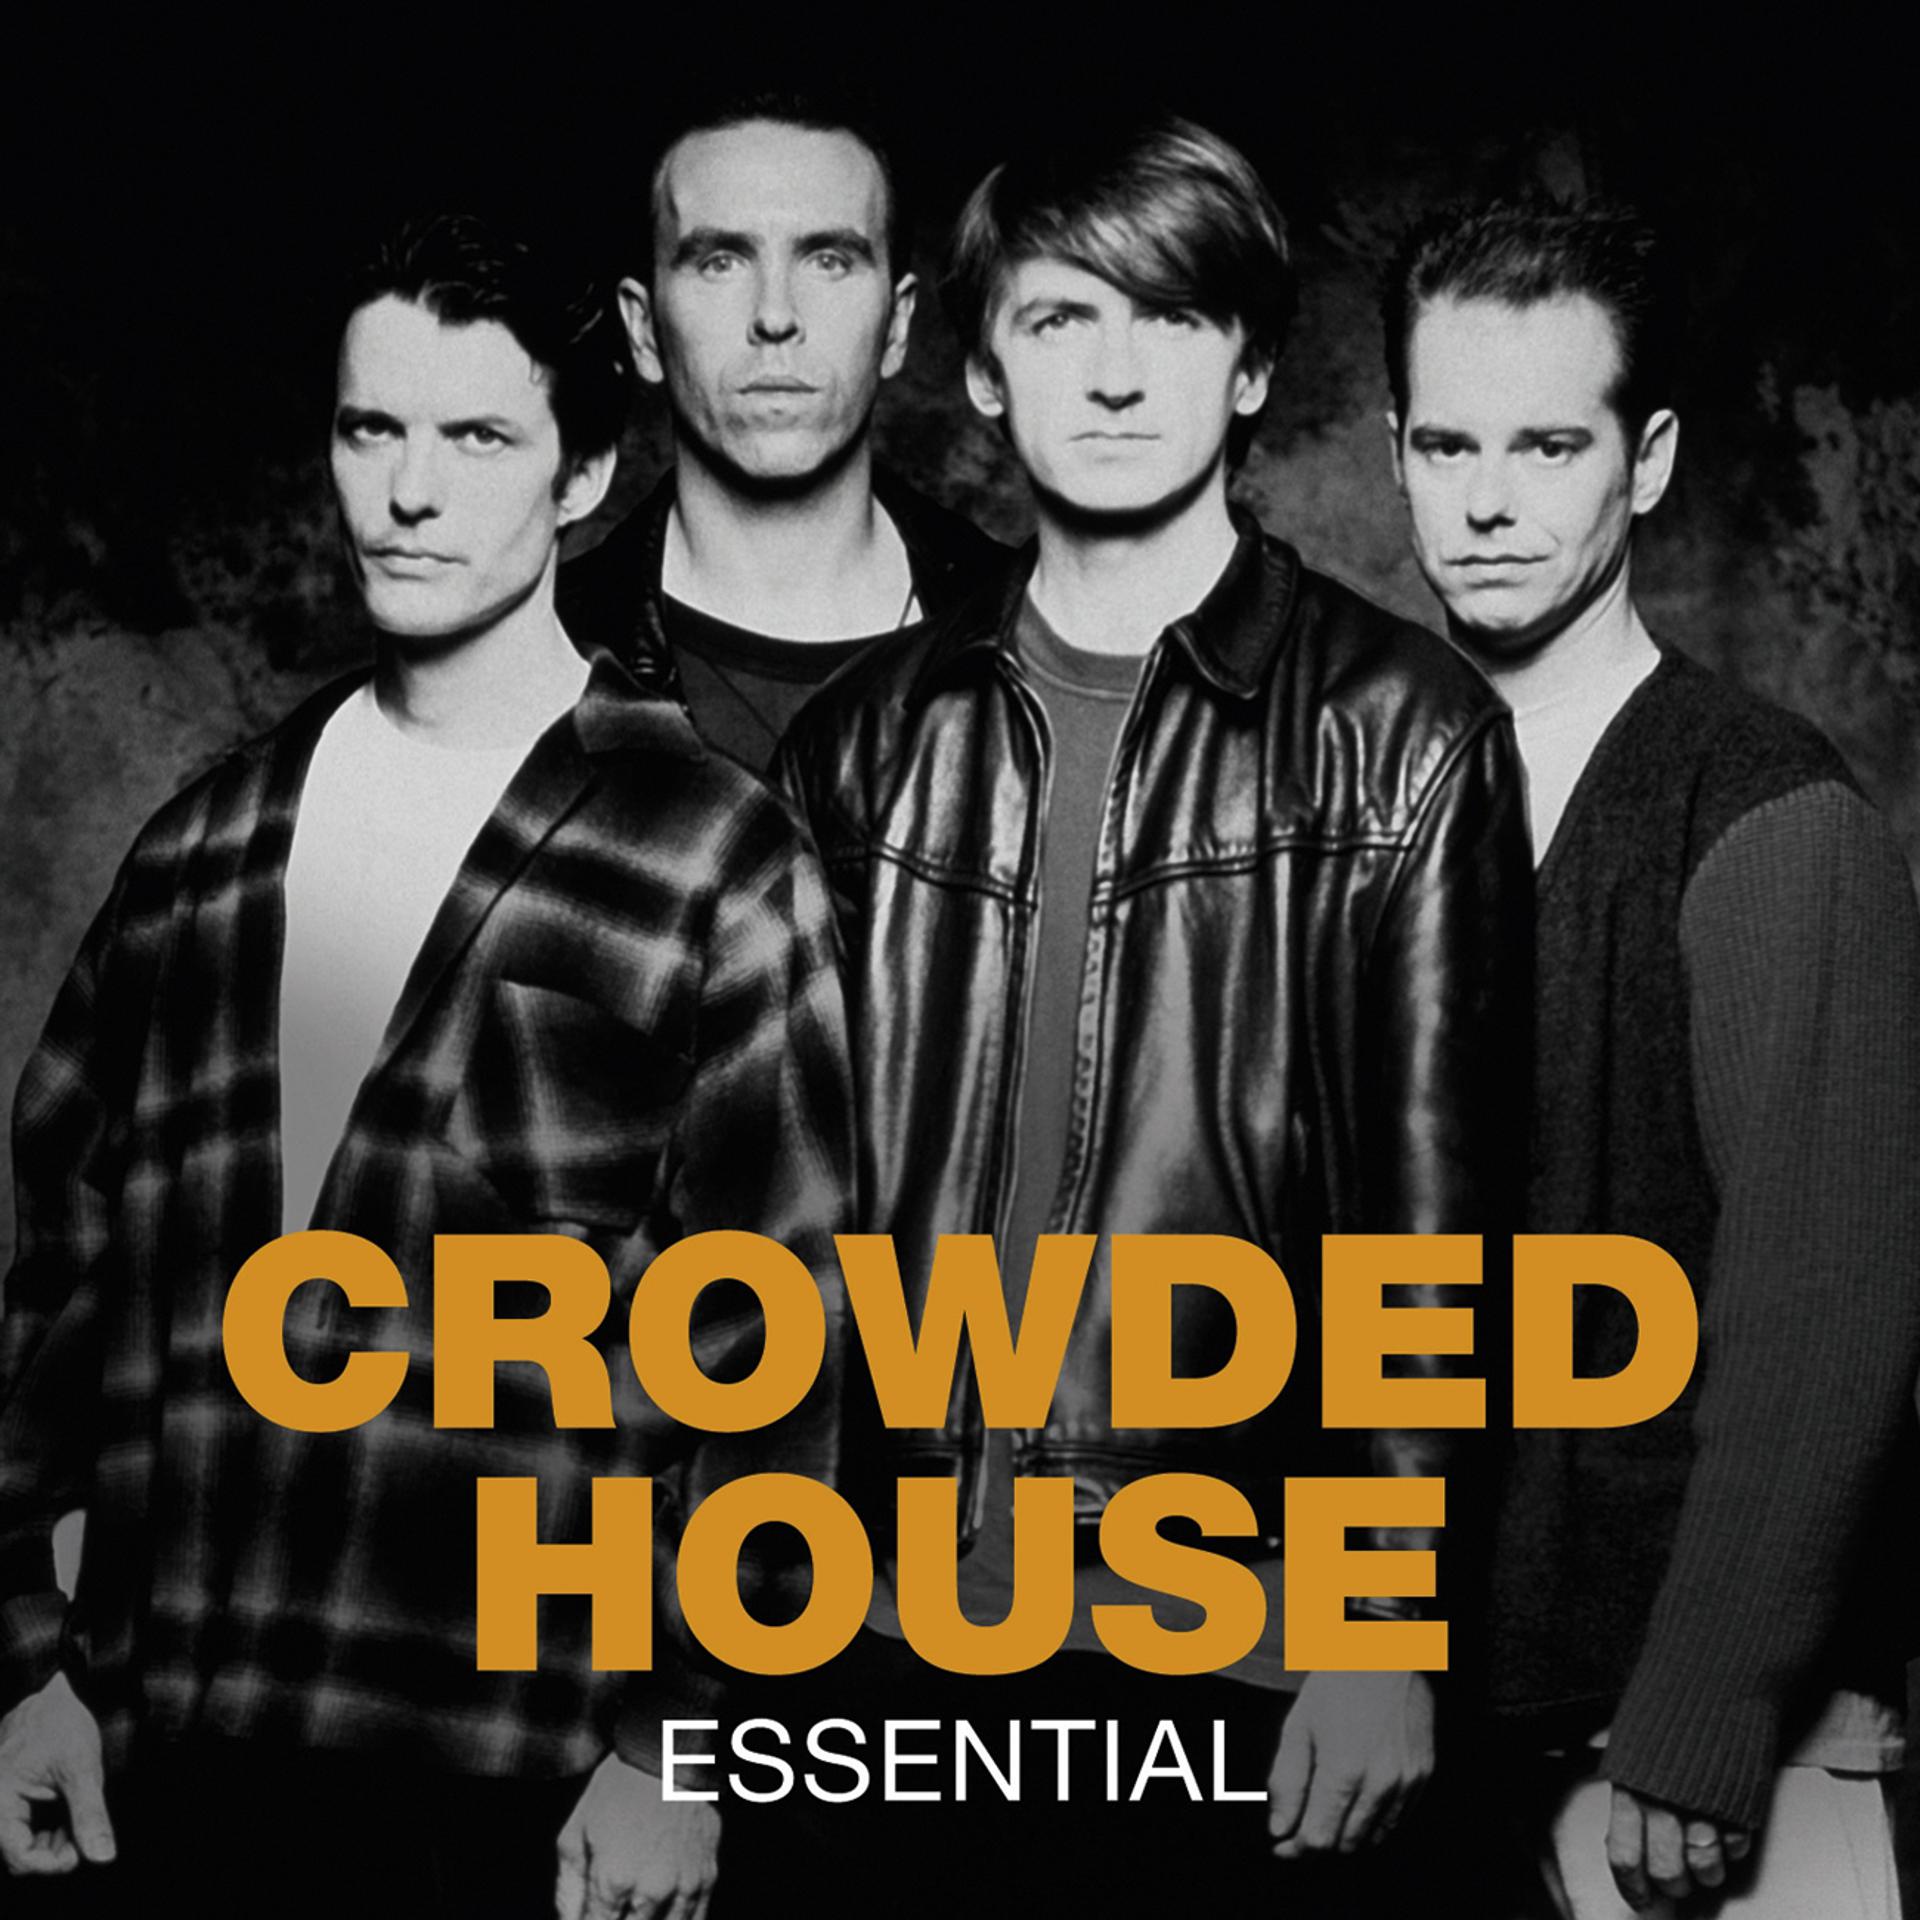 Crowded house don t dream it s. Crowded House 1986 группа. Crowded House crowded House 1986. Crowded House обложки альбомов. Crowded House обложки альбомов crowded.